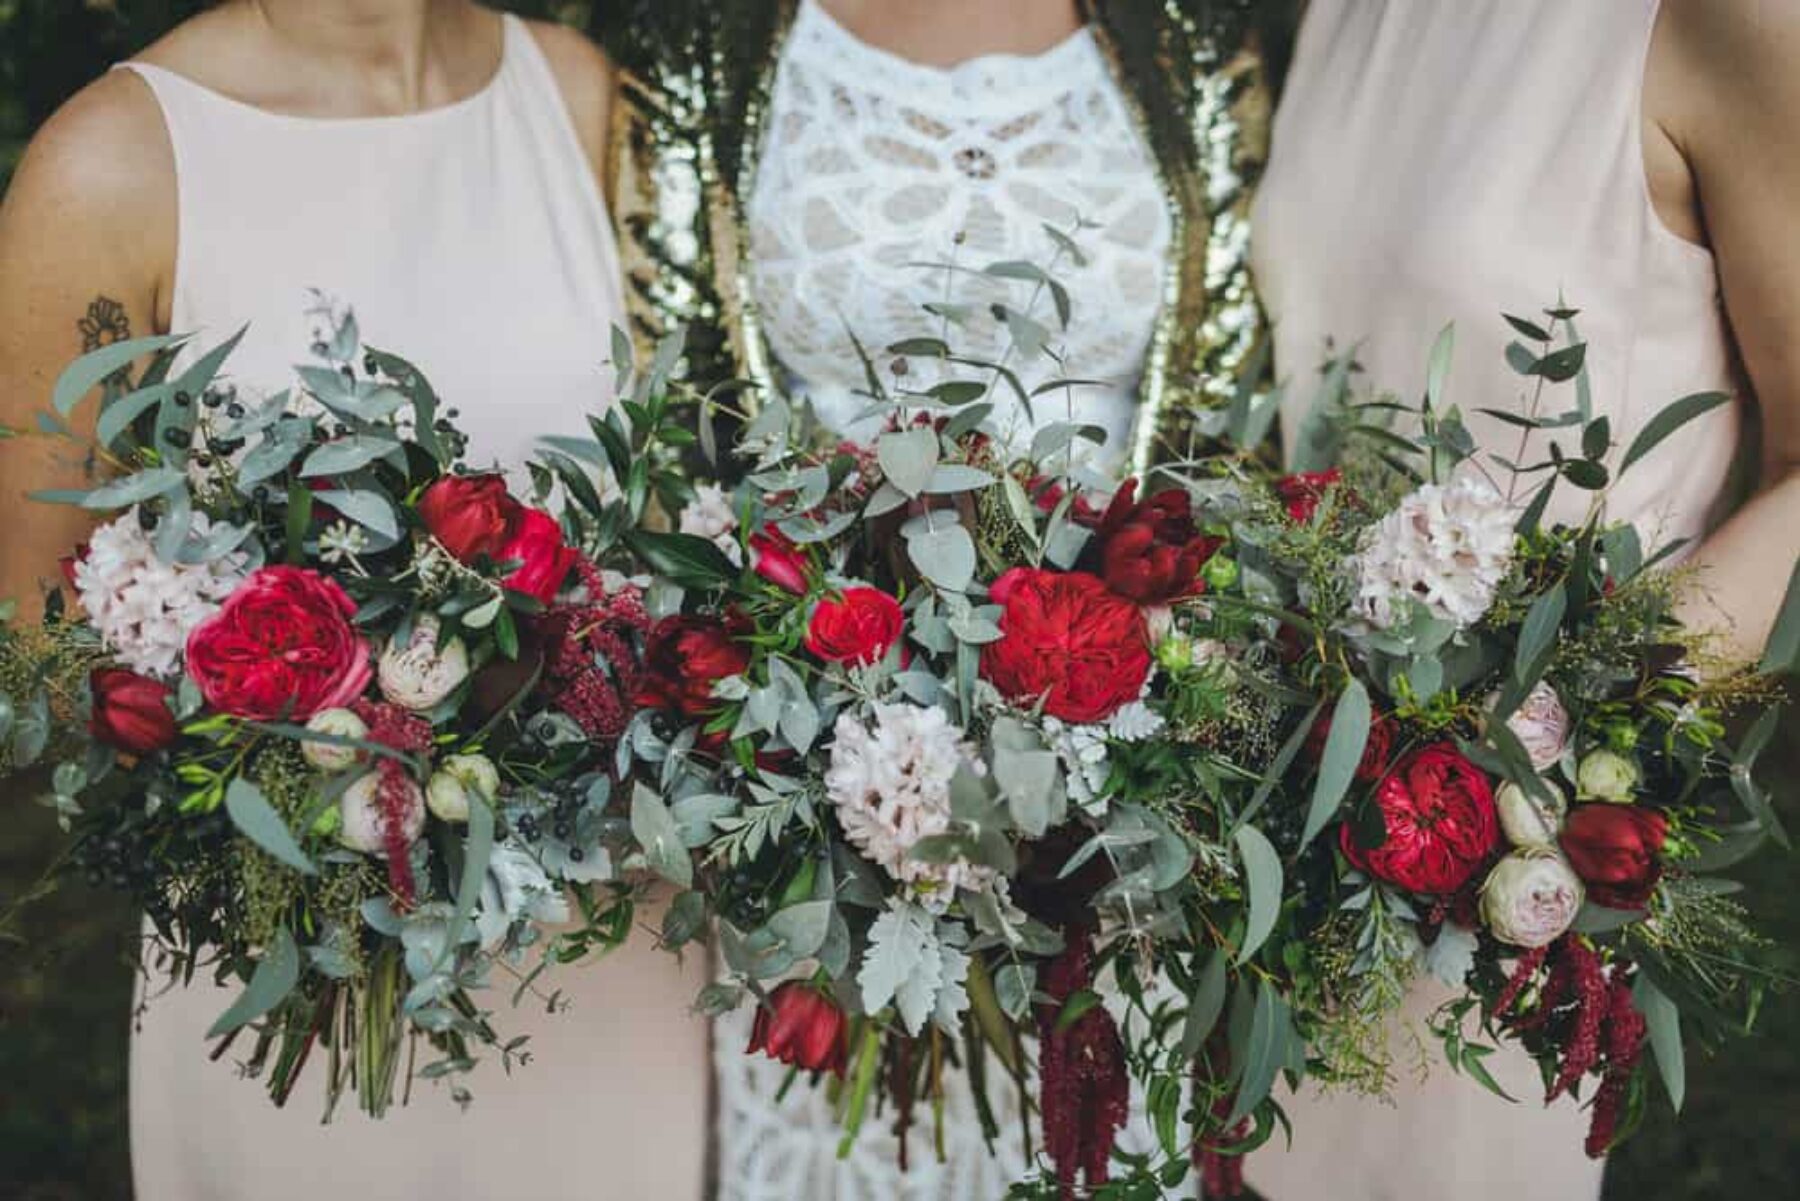 Rose and amaranth bouquet by Willow Bud